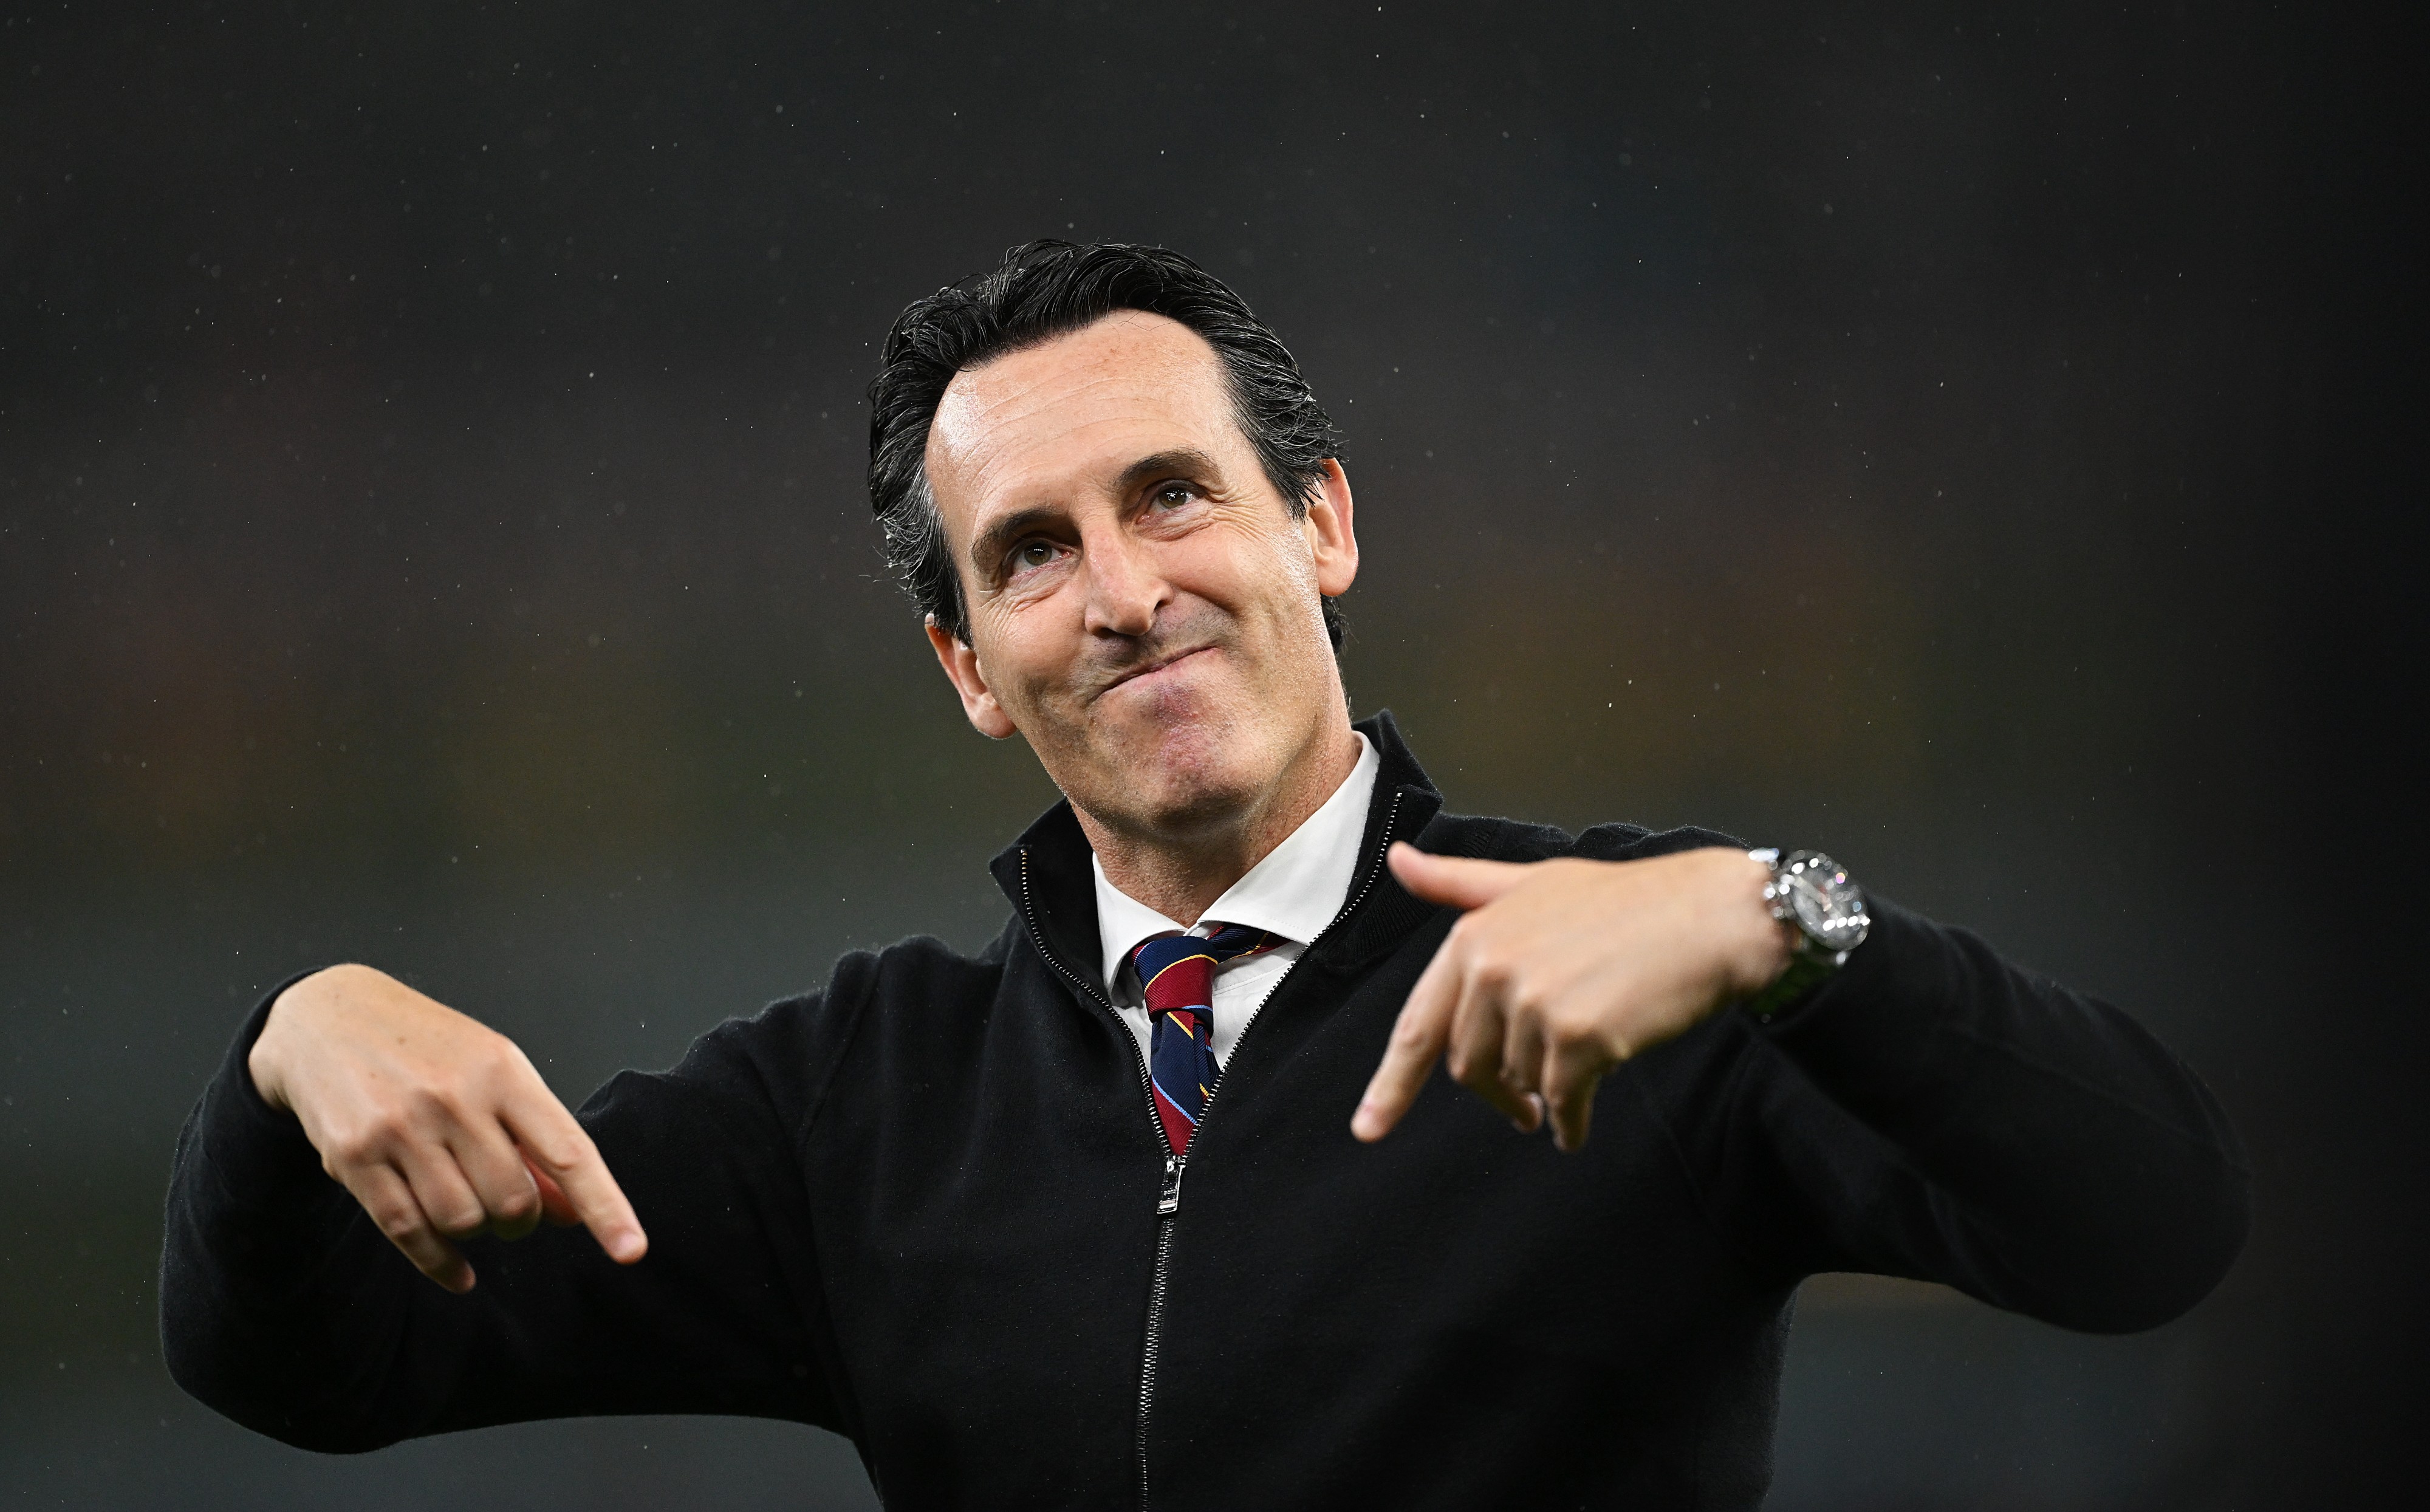 Double Champions League winner set for shock Villa move as Emery works his magic again